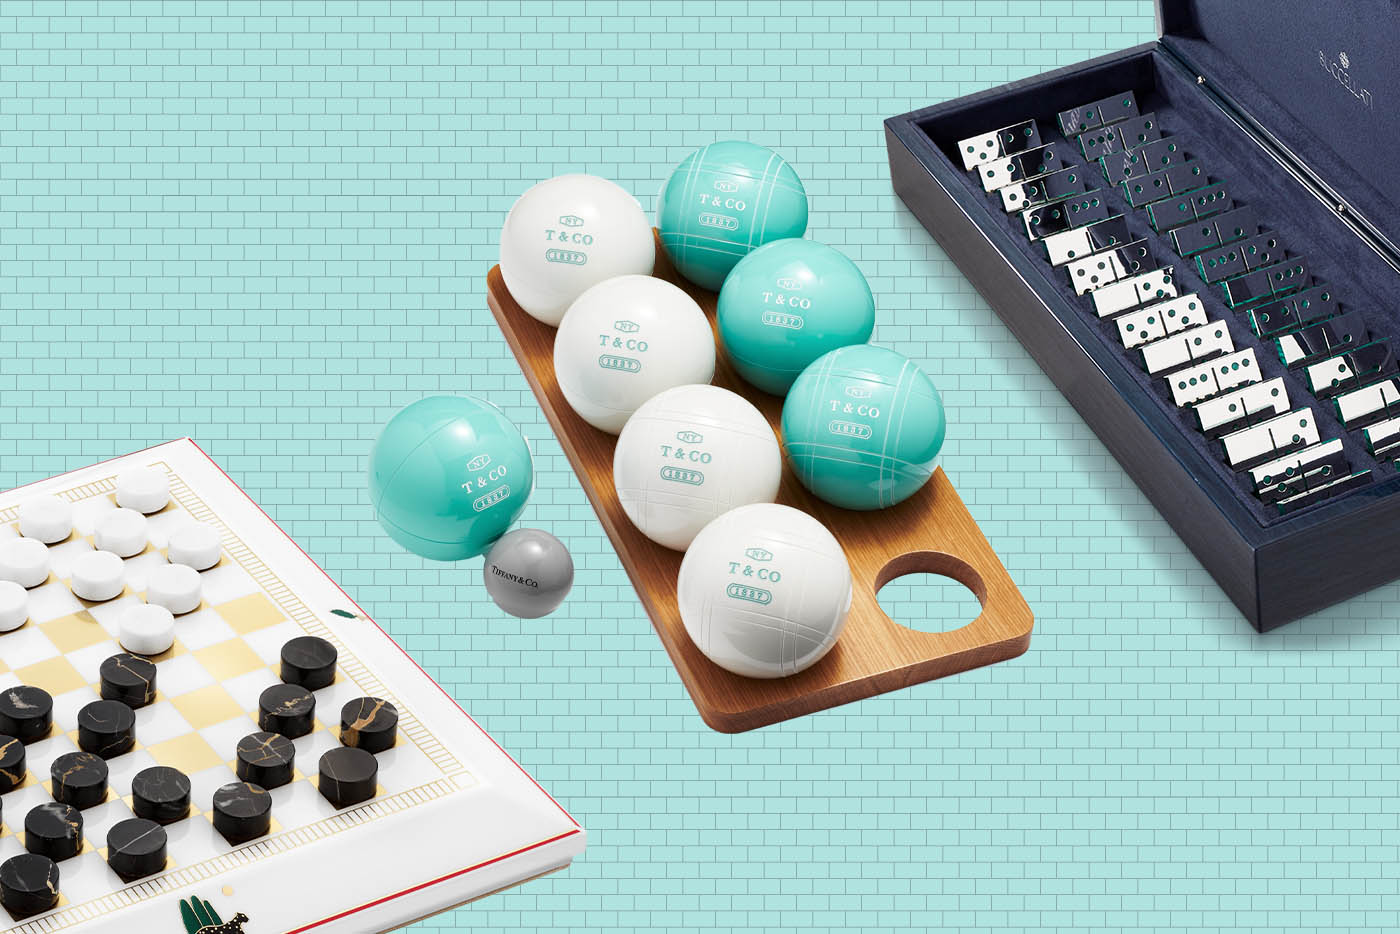 Up your game: 6 luxury game sets that make perfect gifts